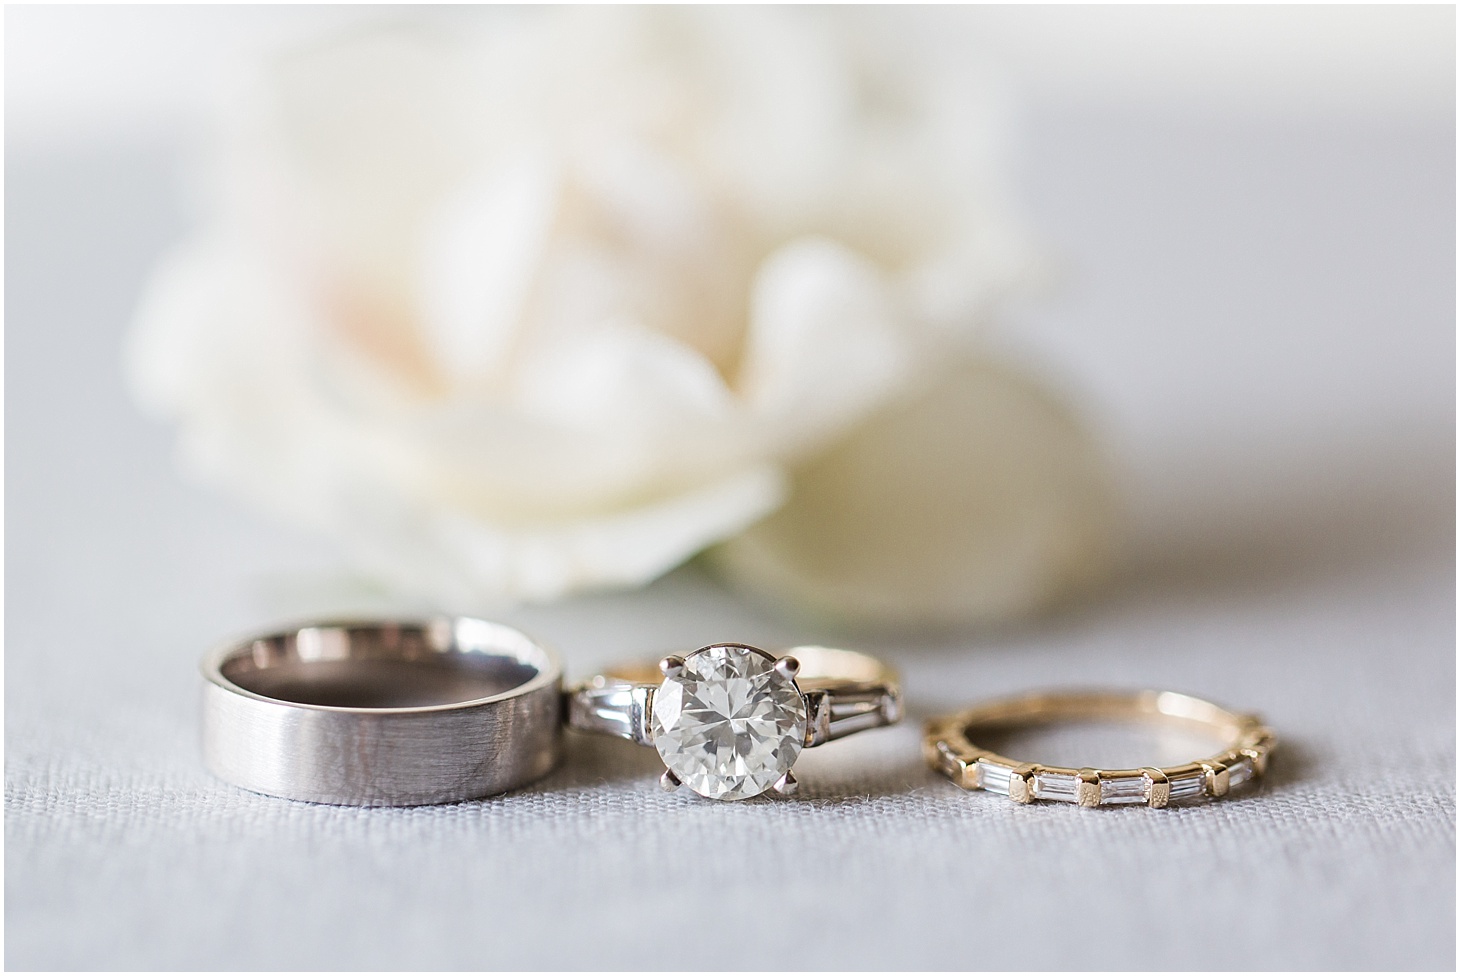 Vienna Jewelry Engagement Ring and Wedding Bands | Winter Brunch Wedding at Hay-Adams Hotel in DC | Sarah Bradshaw Photography